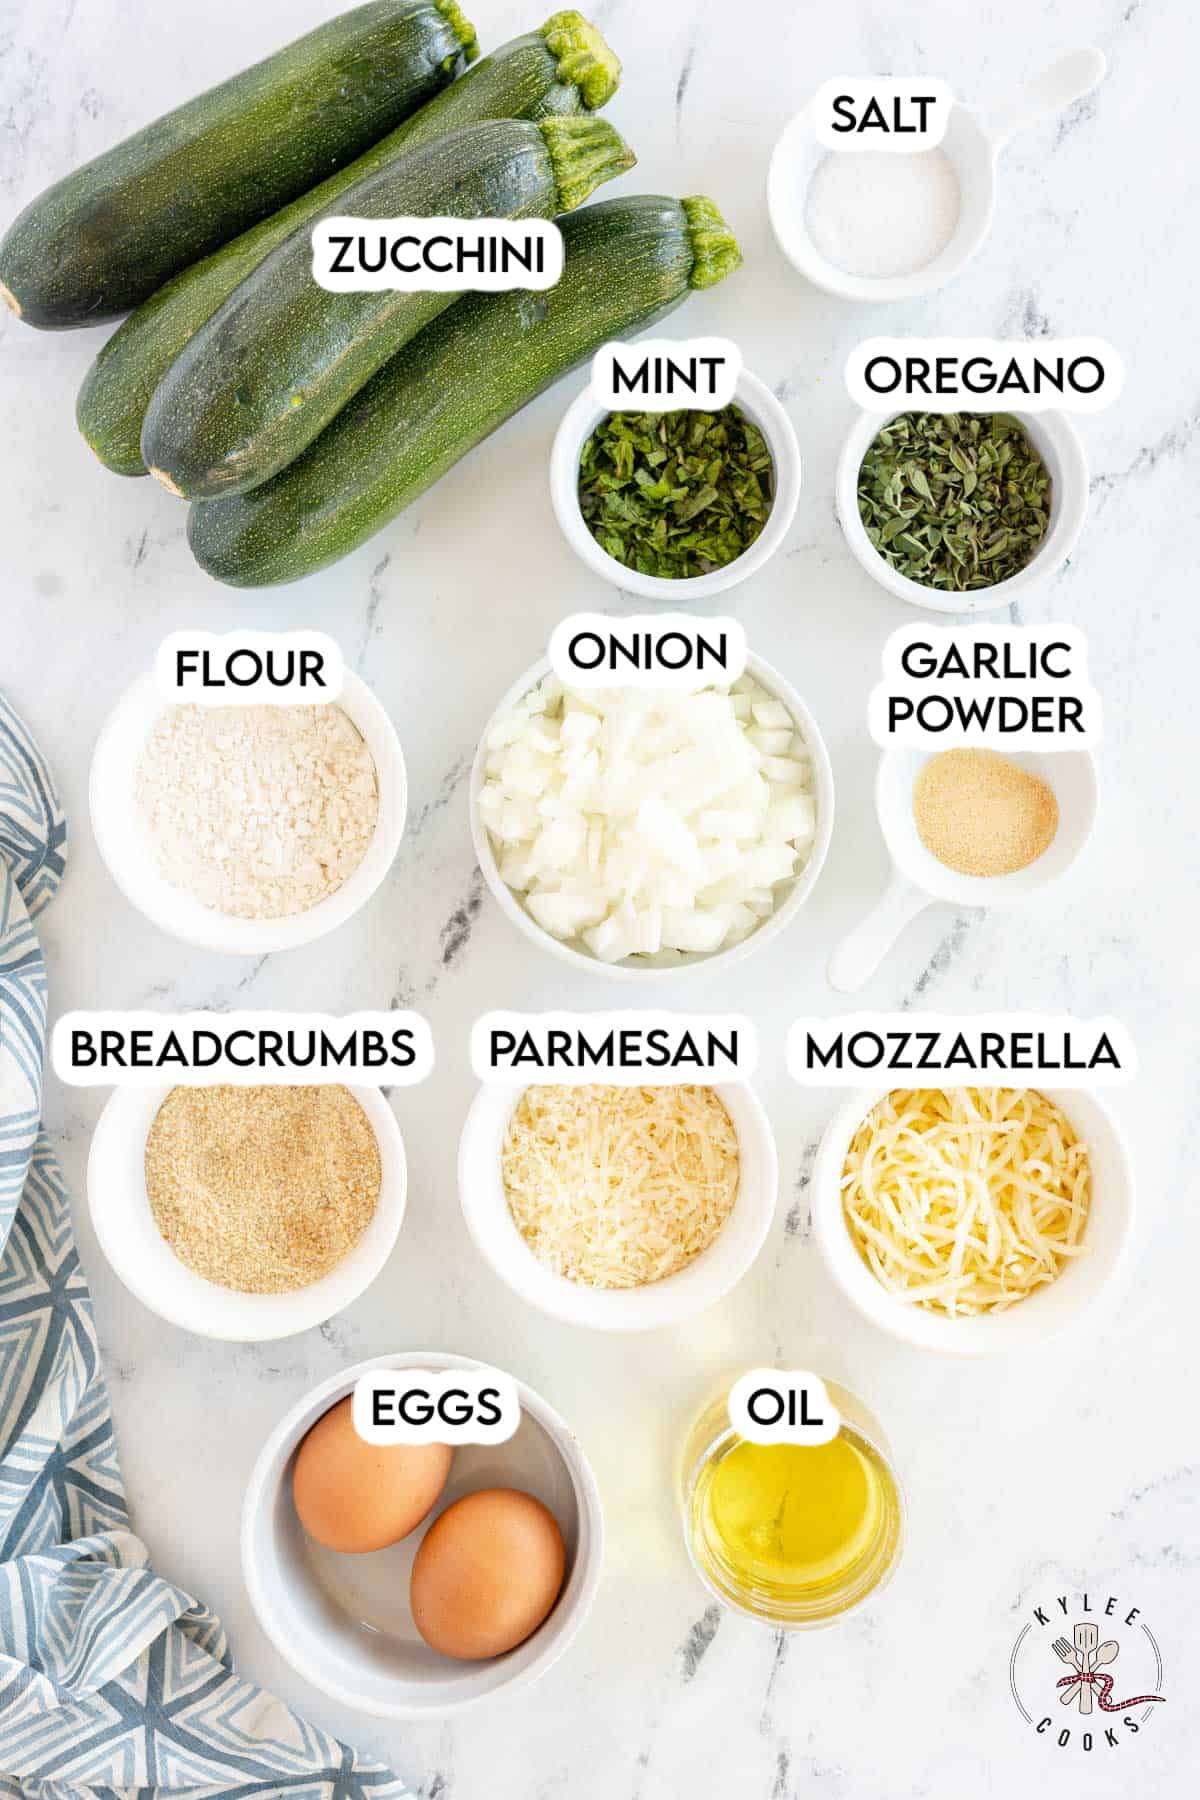 ingredients to make zucchini fritters laid out and labeled.